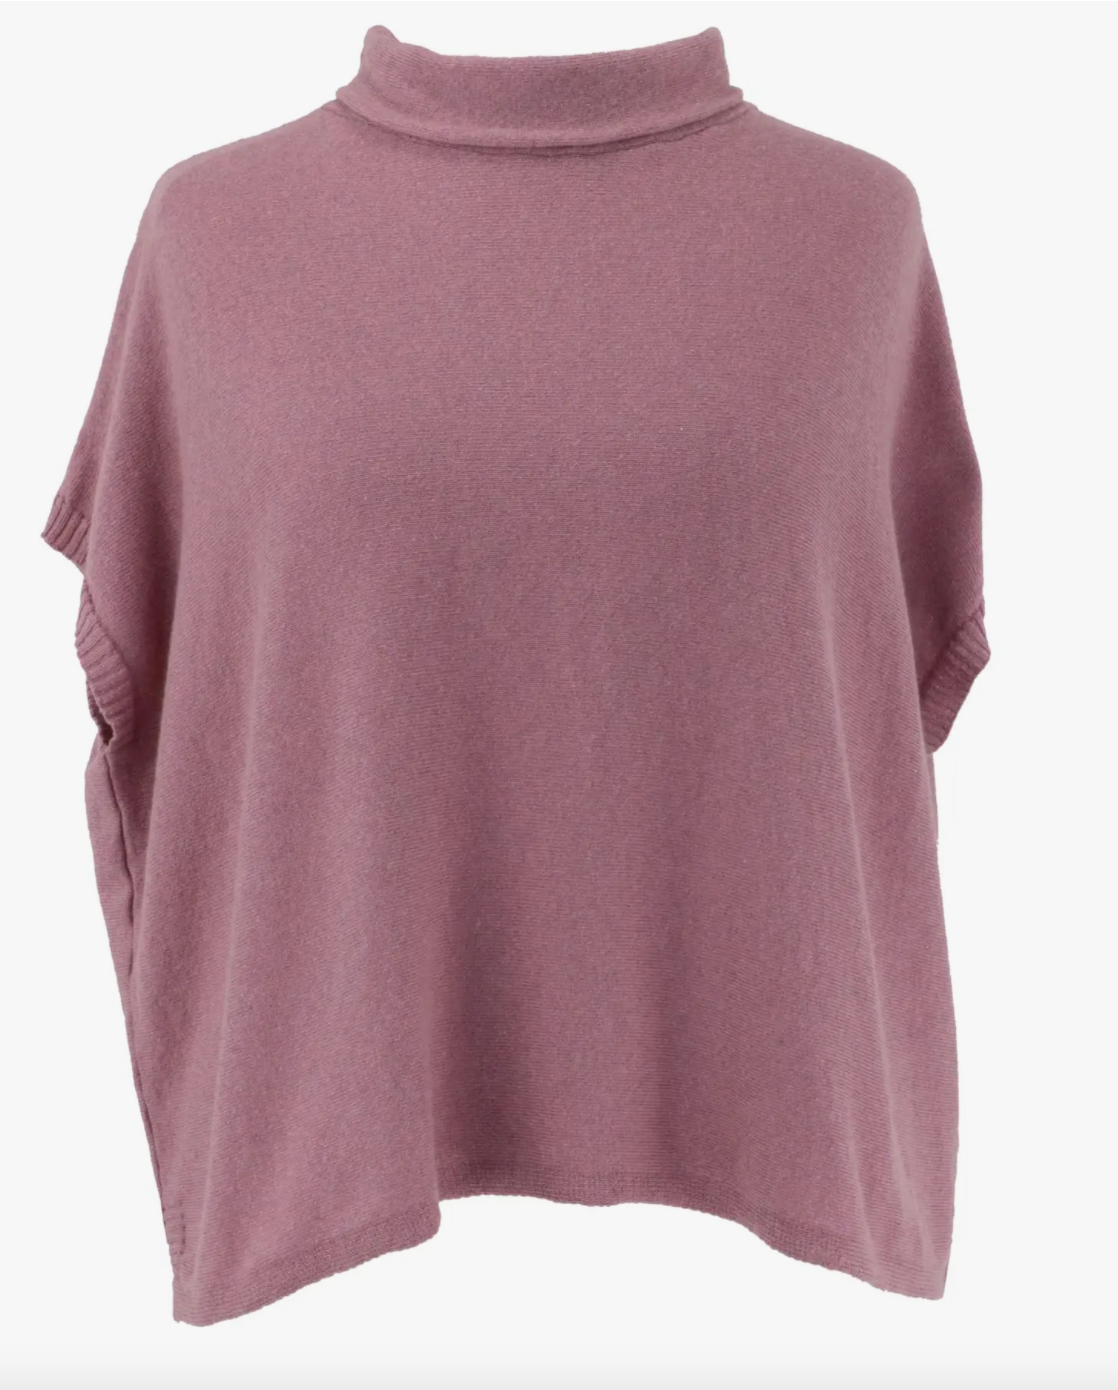 Cashmere Blend Tunic - Rose Pink